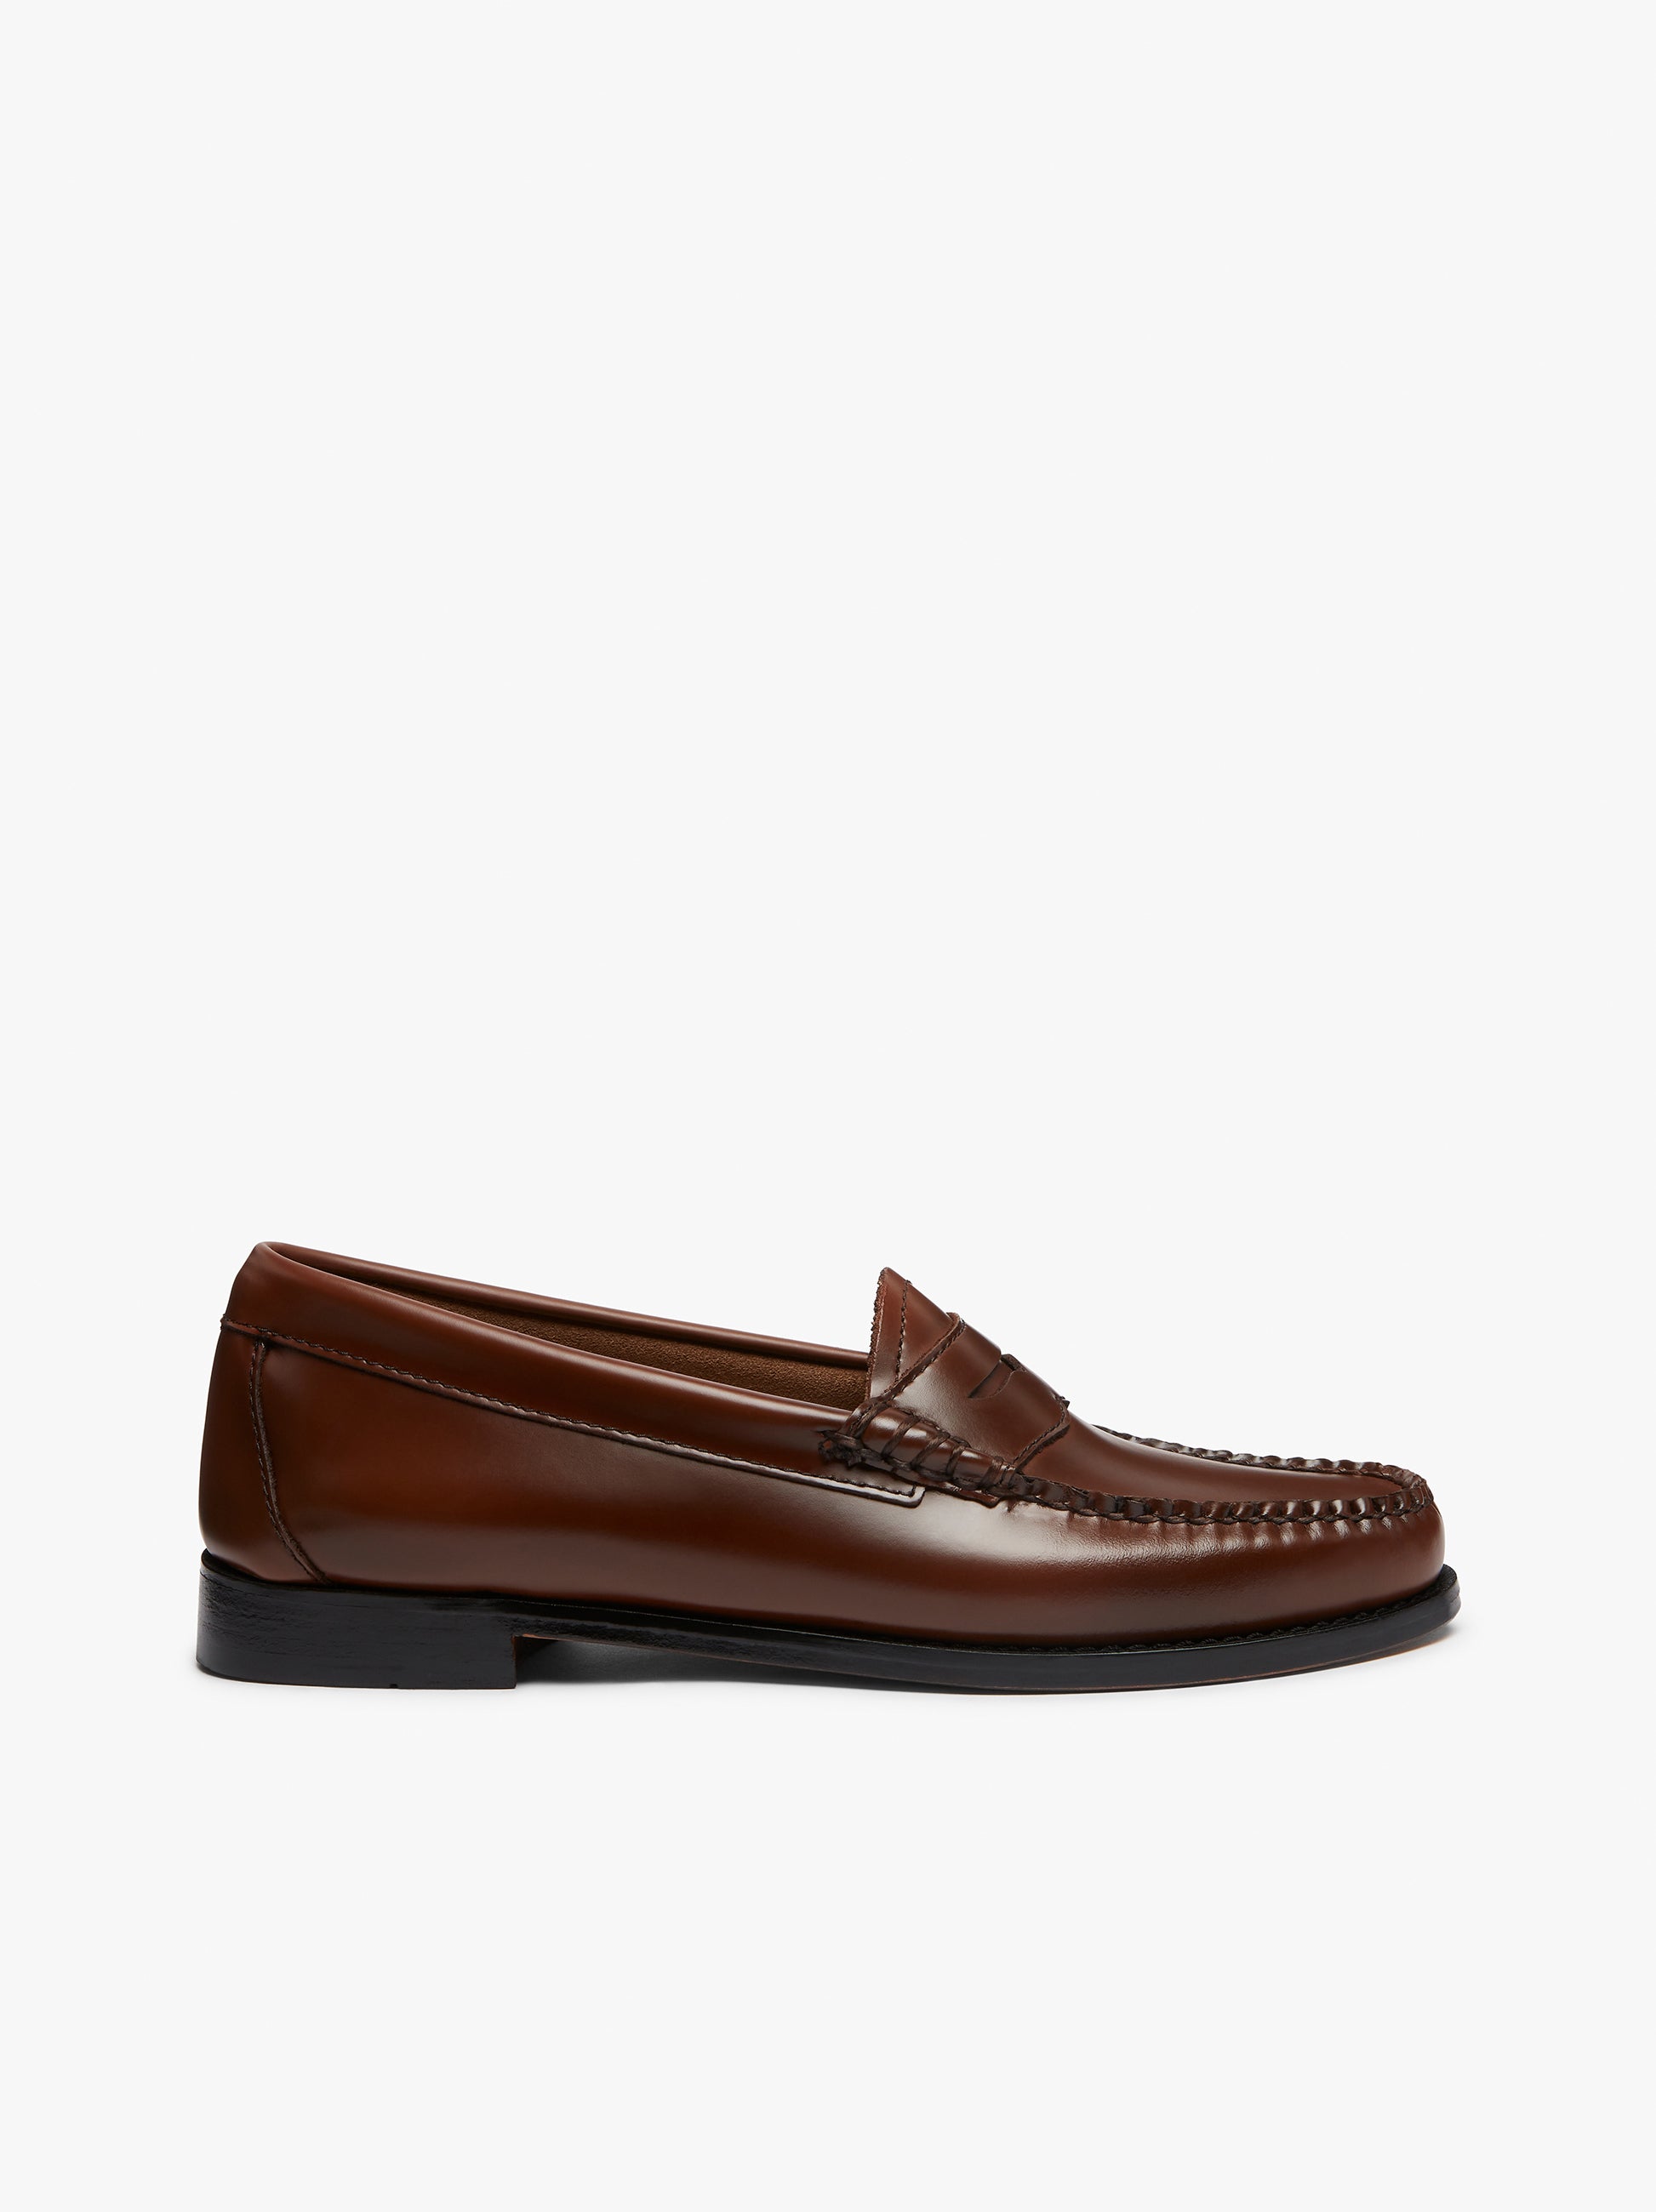 Weejuns Penny Loafers Cognac Leather